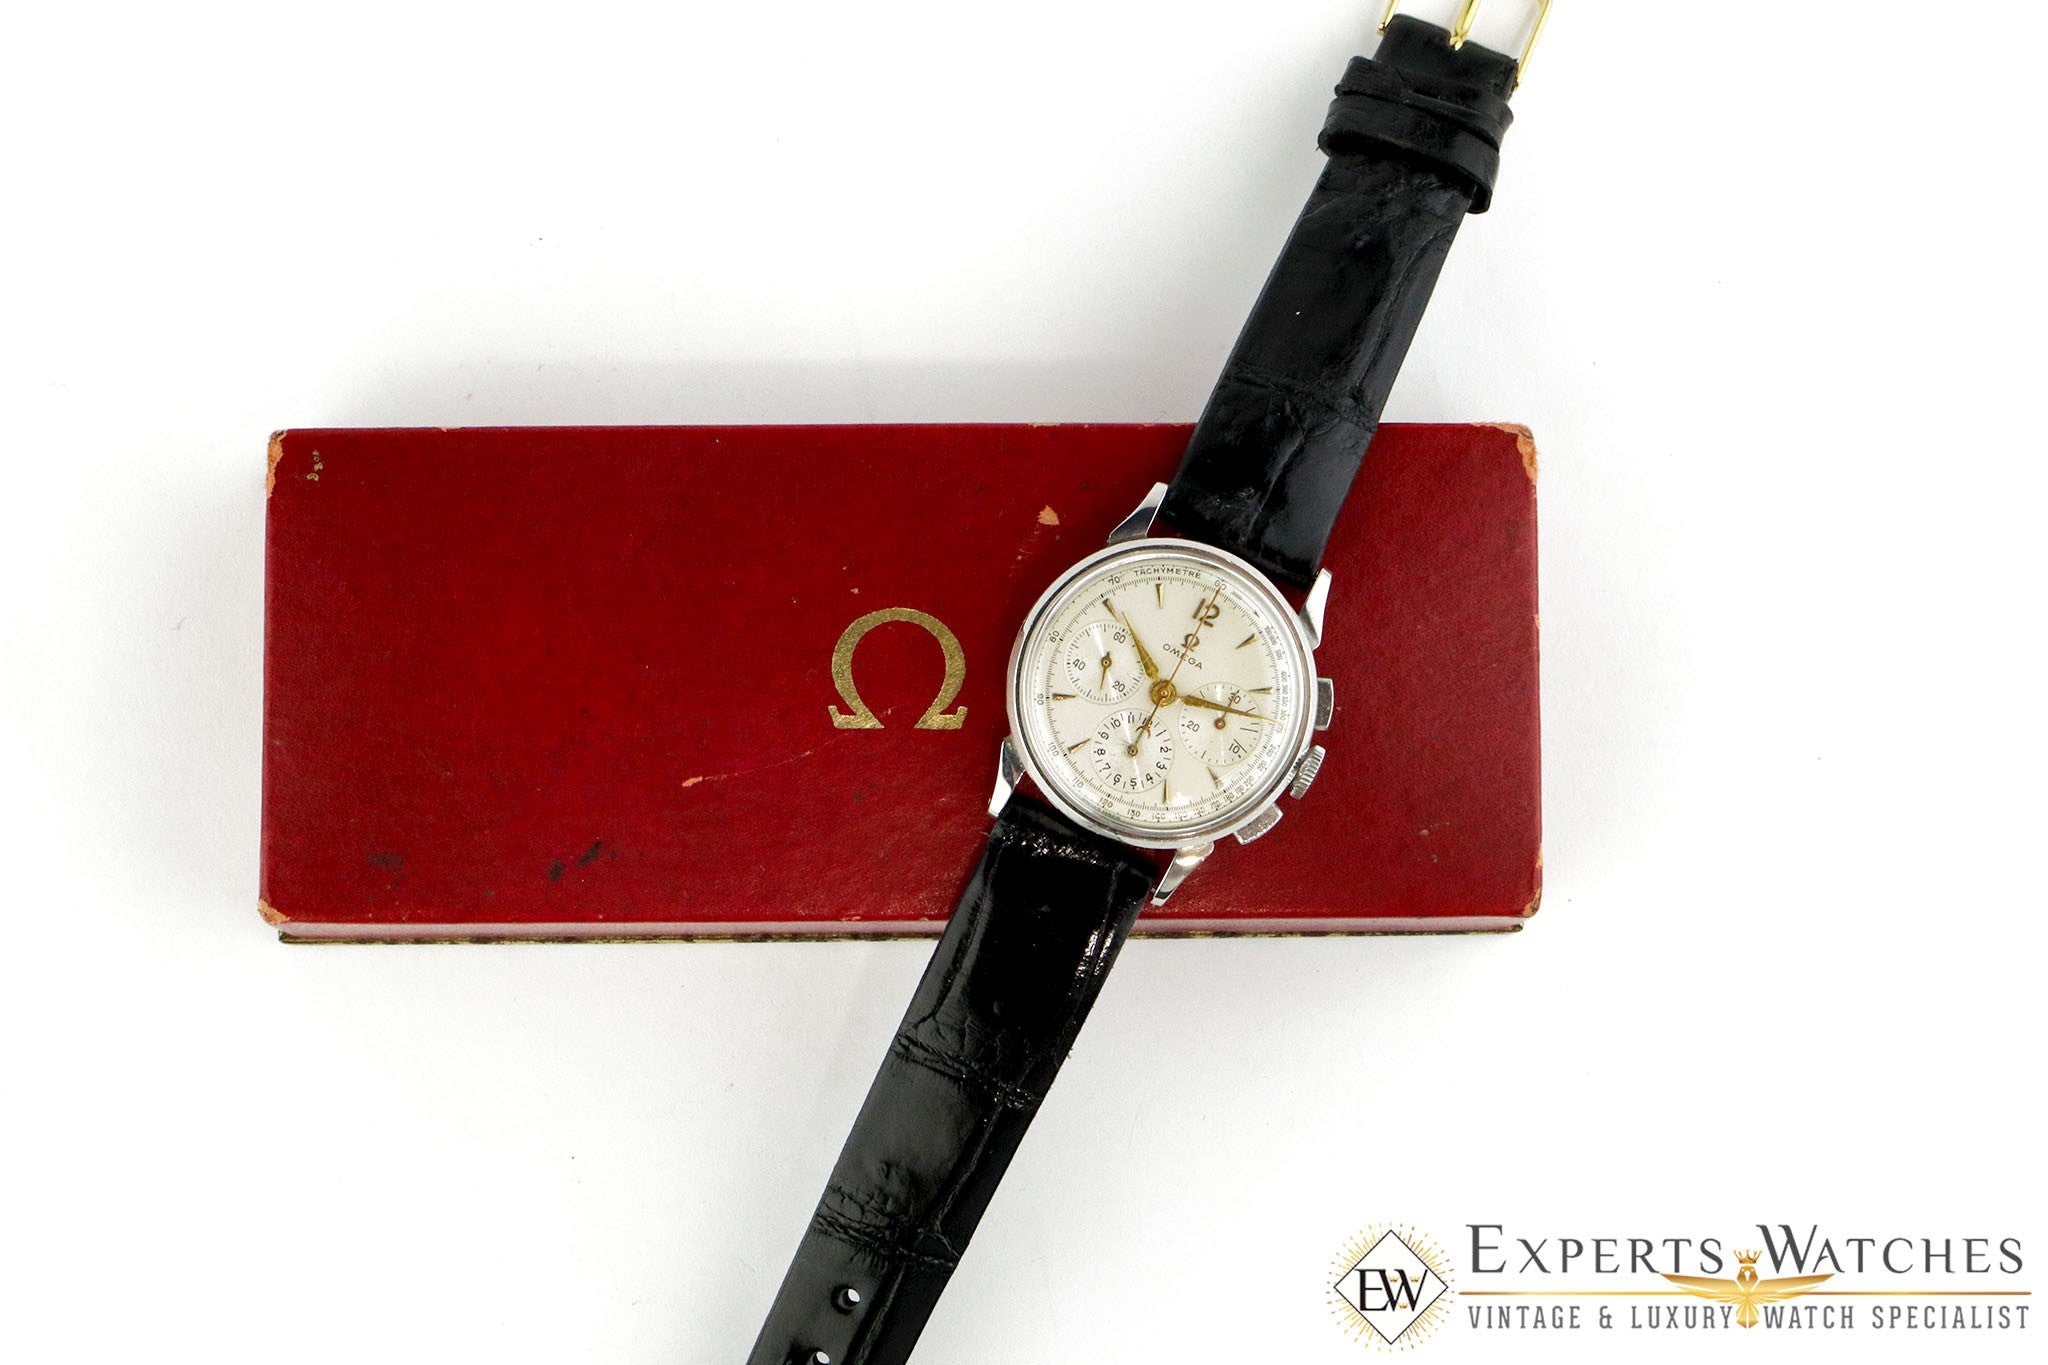 1950s Omega Chronograph Caliber 321 Stainless Steel Watch – The Verma Group